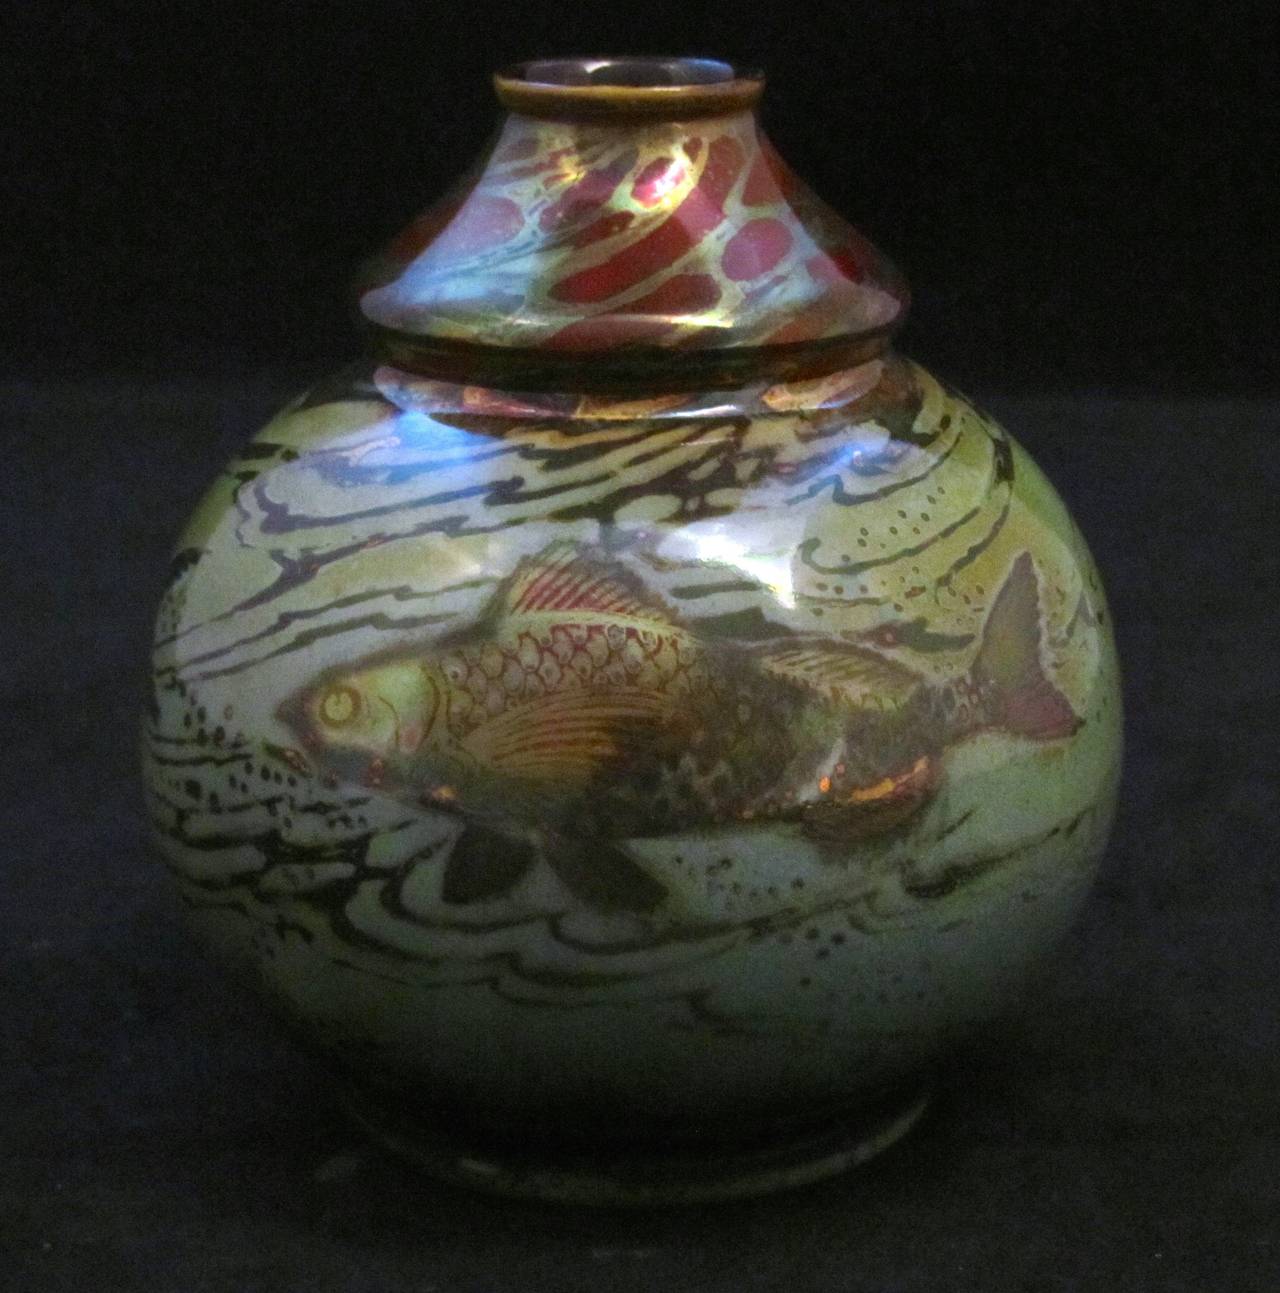 Pilkington's Lustre Vase of Double Gourd Form decorated with Fish by Richard Joyce